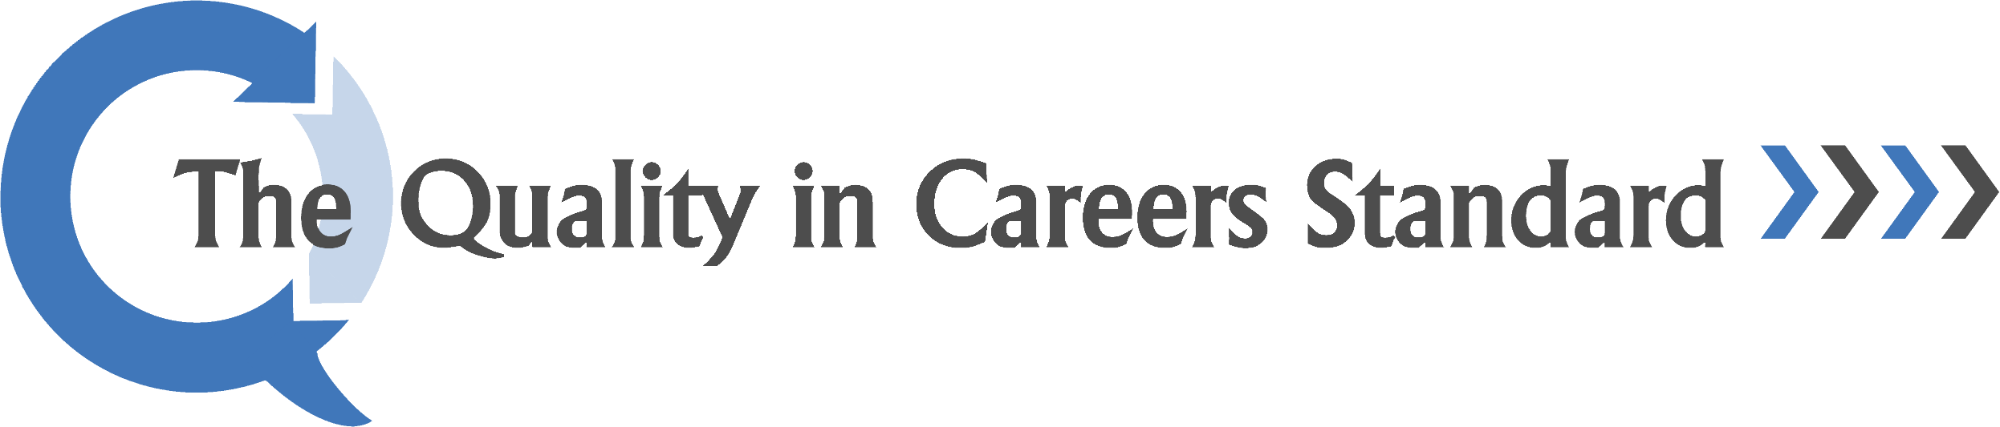 Quality in Careers Standard Logo